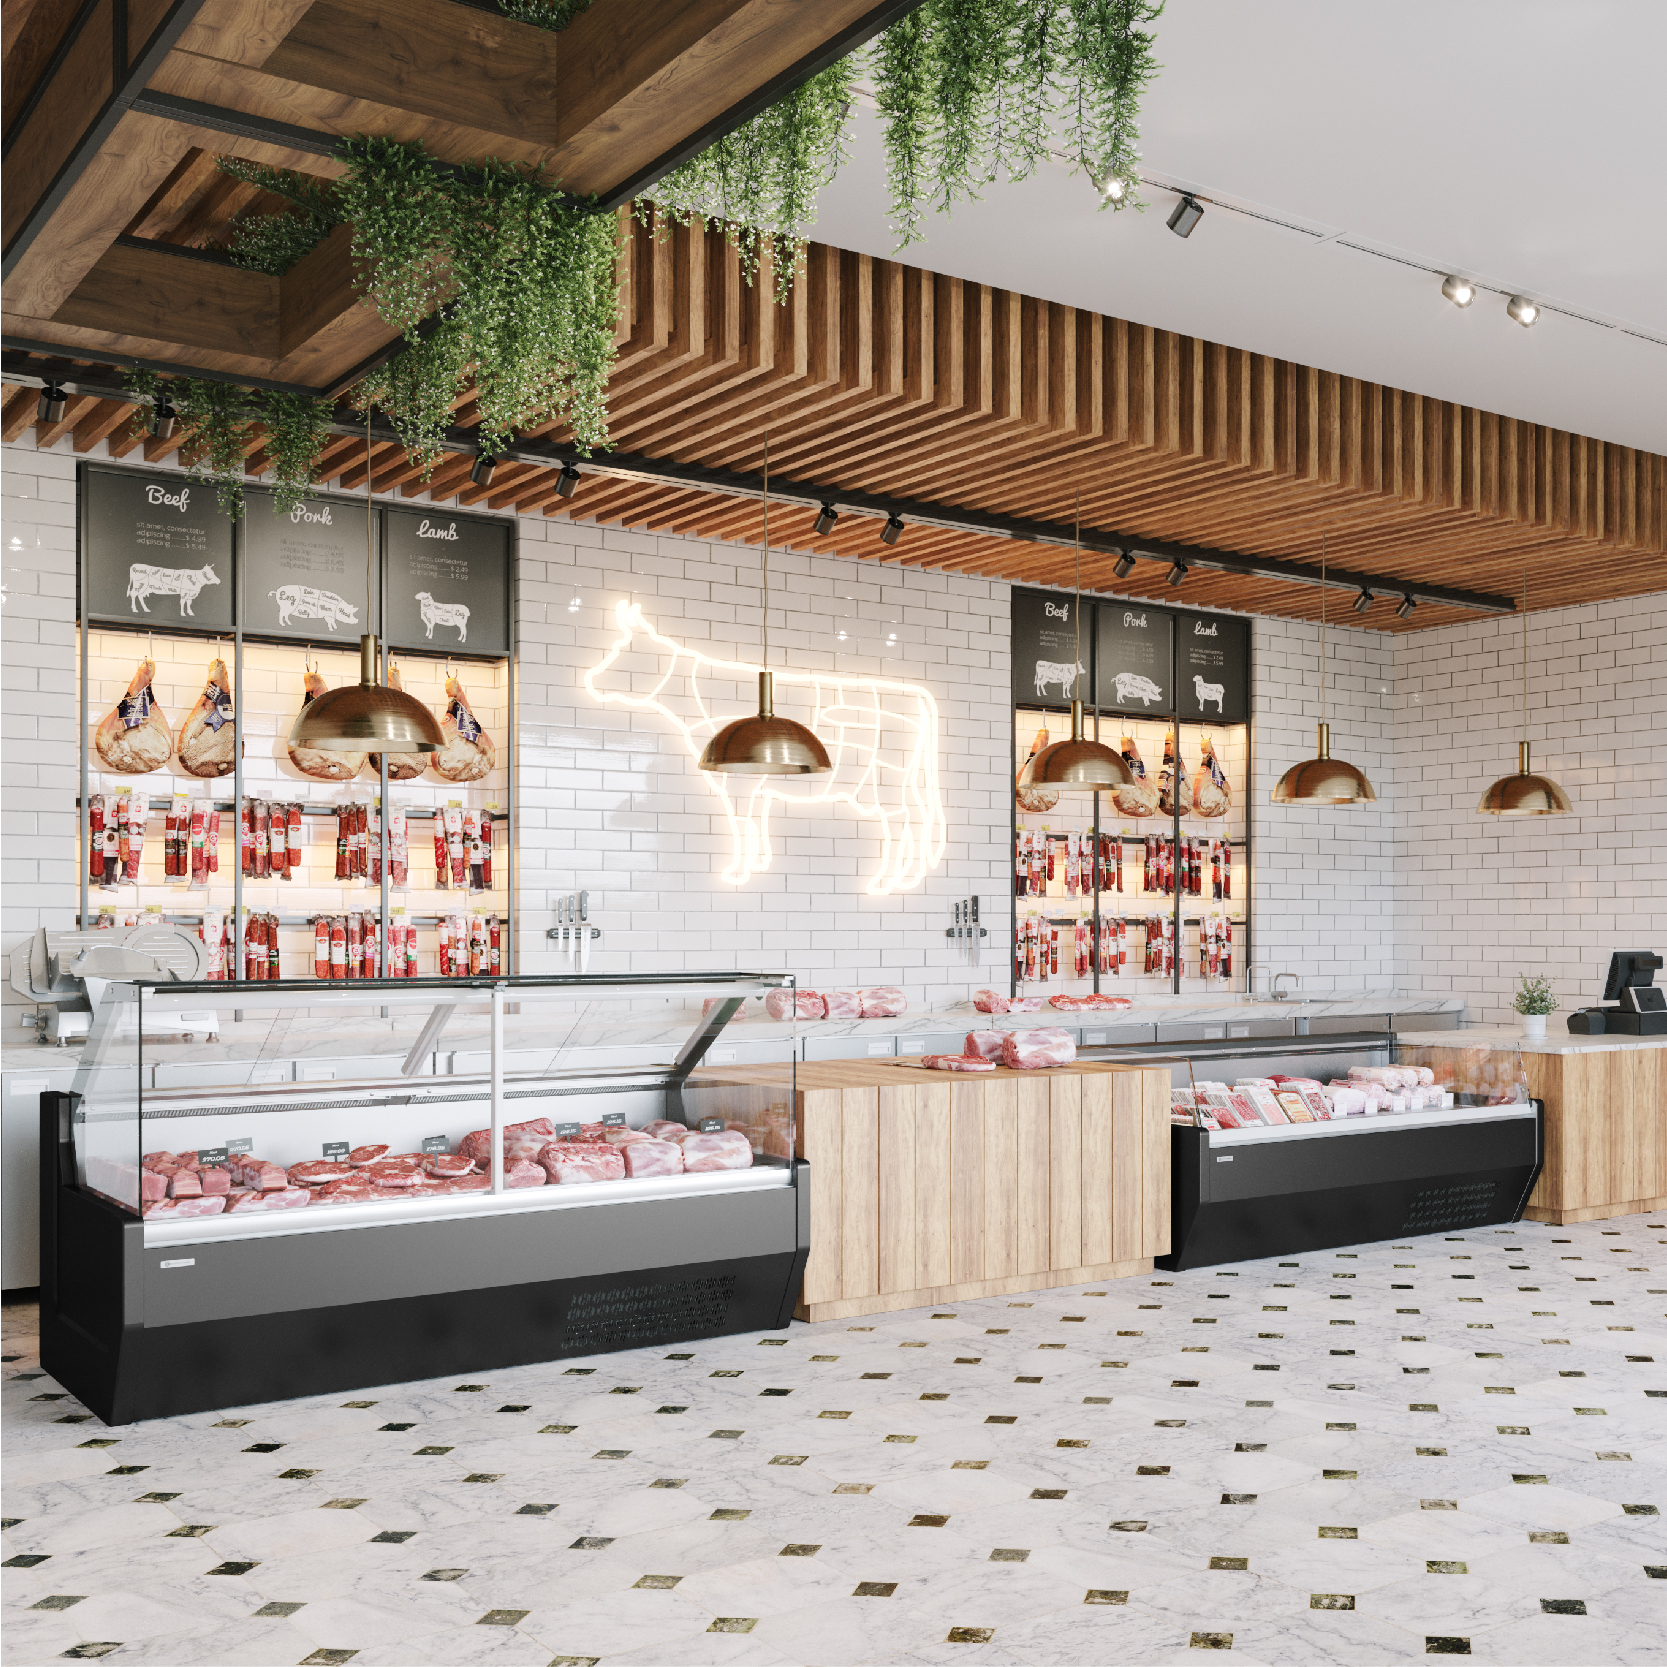 Are you opening or intending to renovate a butcher shop?